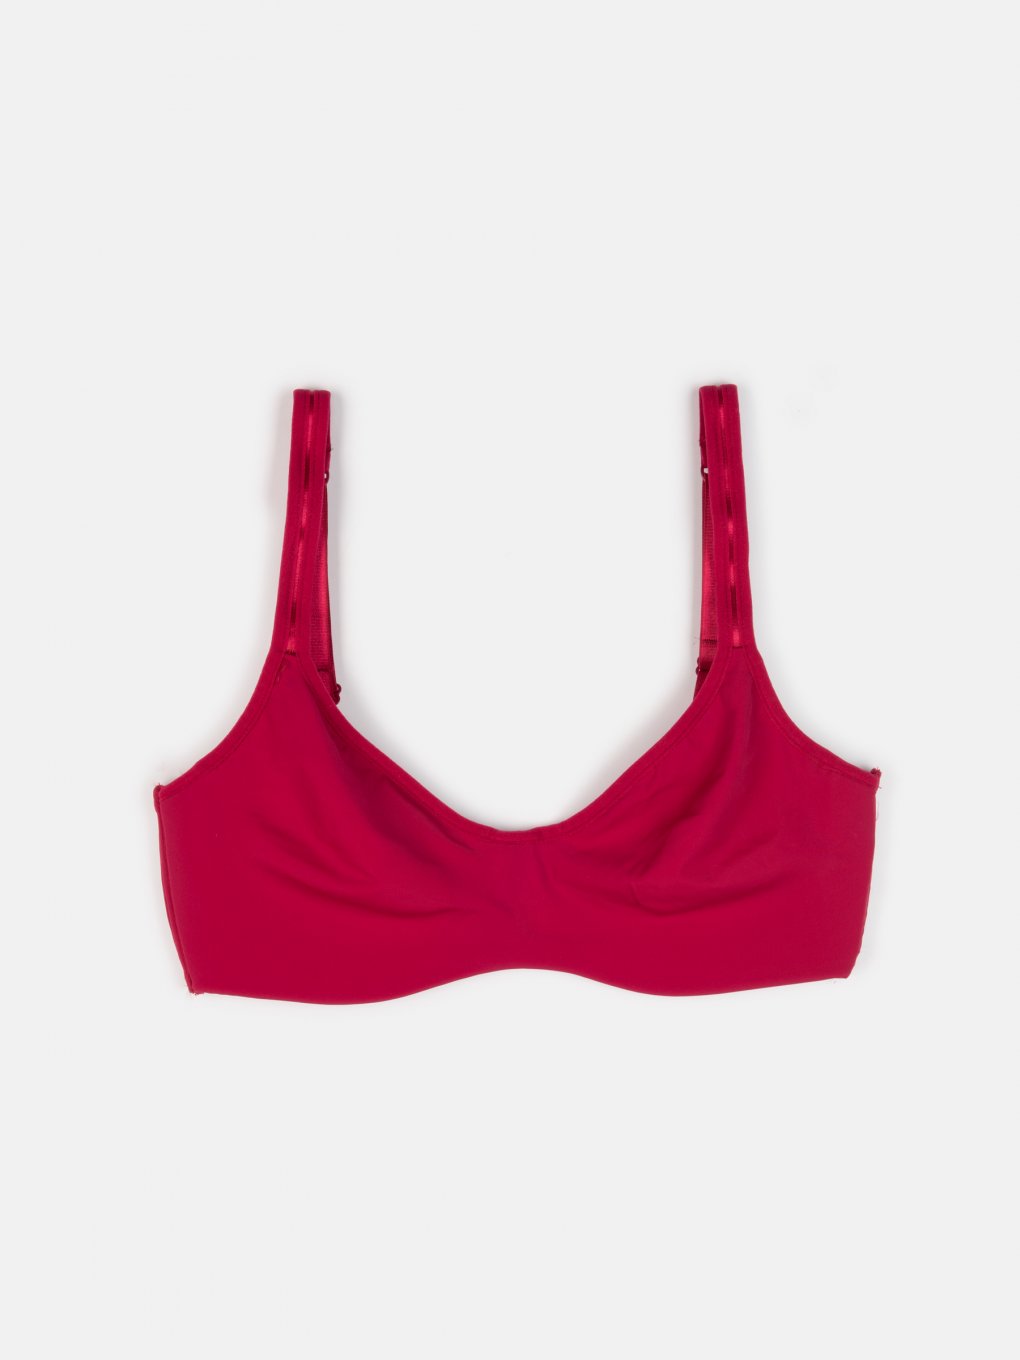 Comfortable unlined wired bra